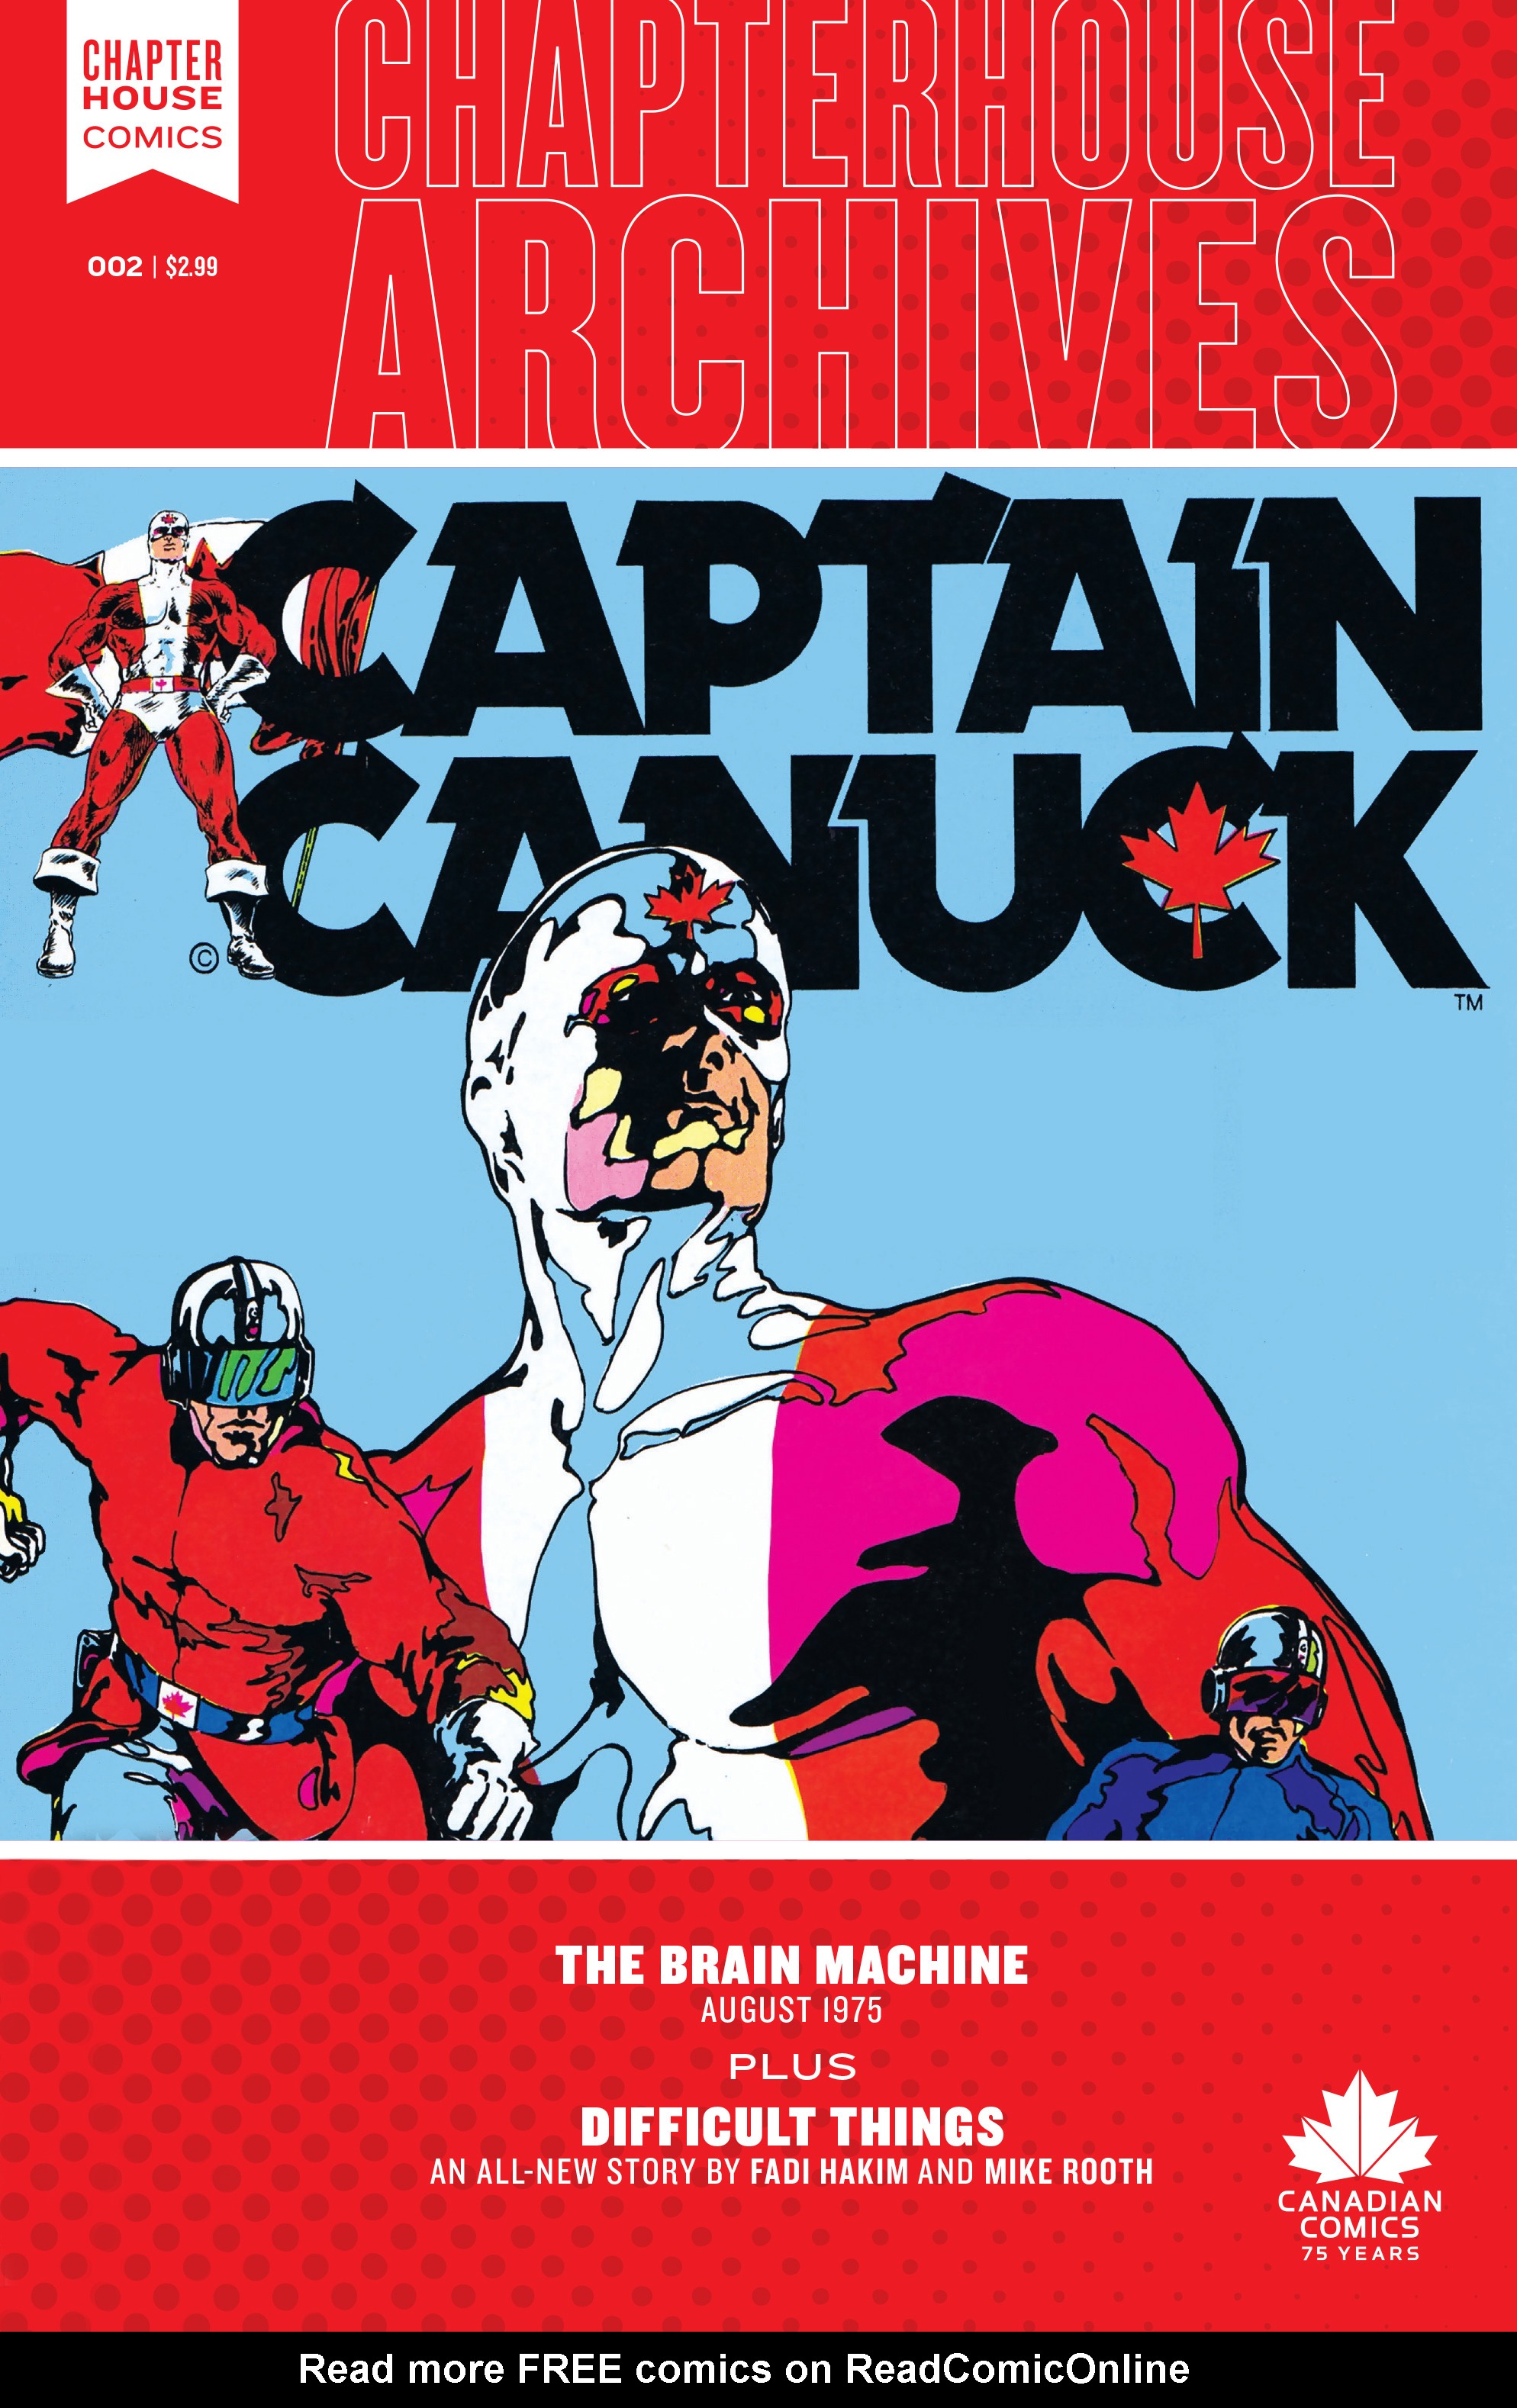 Read online Chapterhouse Archives: Captain Canuck comic -  Issue #2 - 1